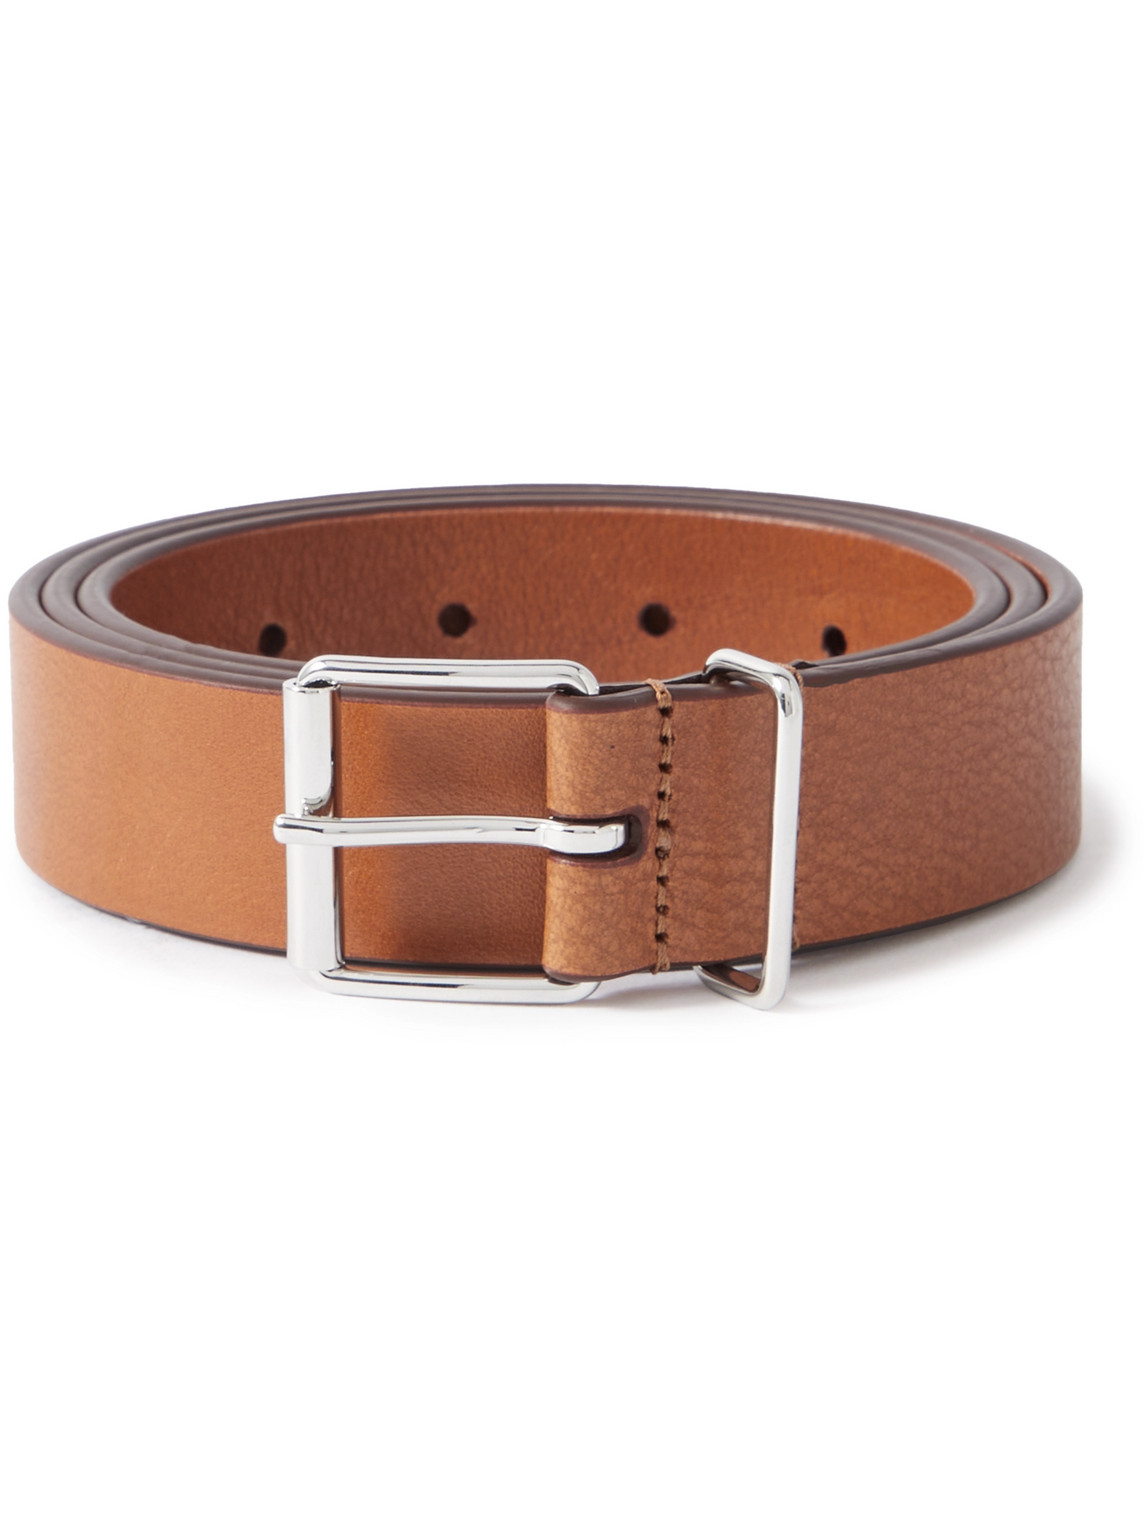 Anderson's Leather Belt In Brown